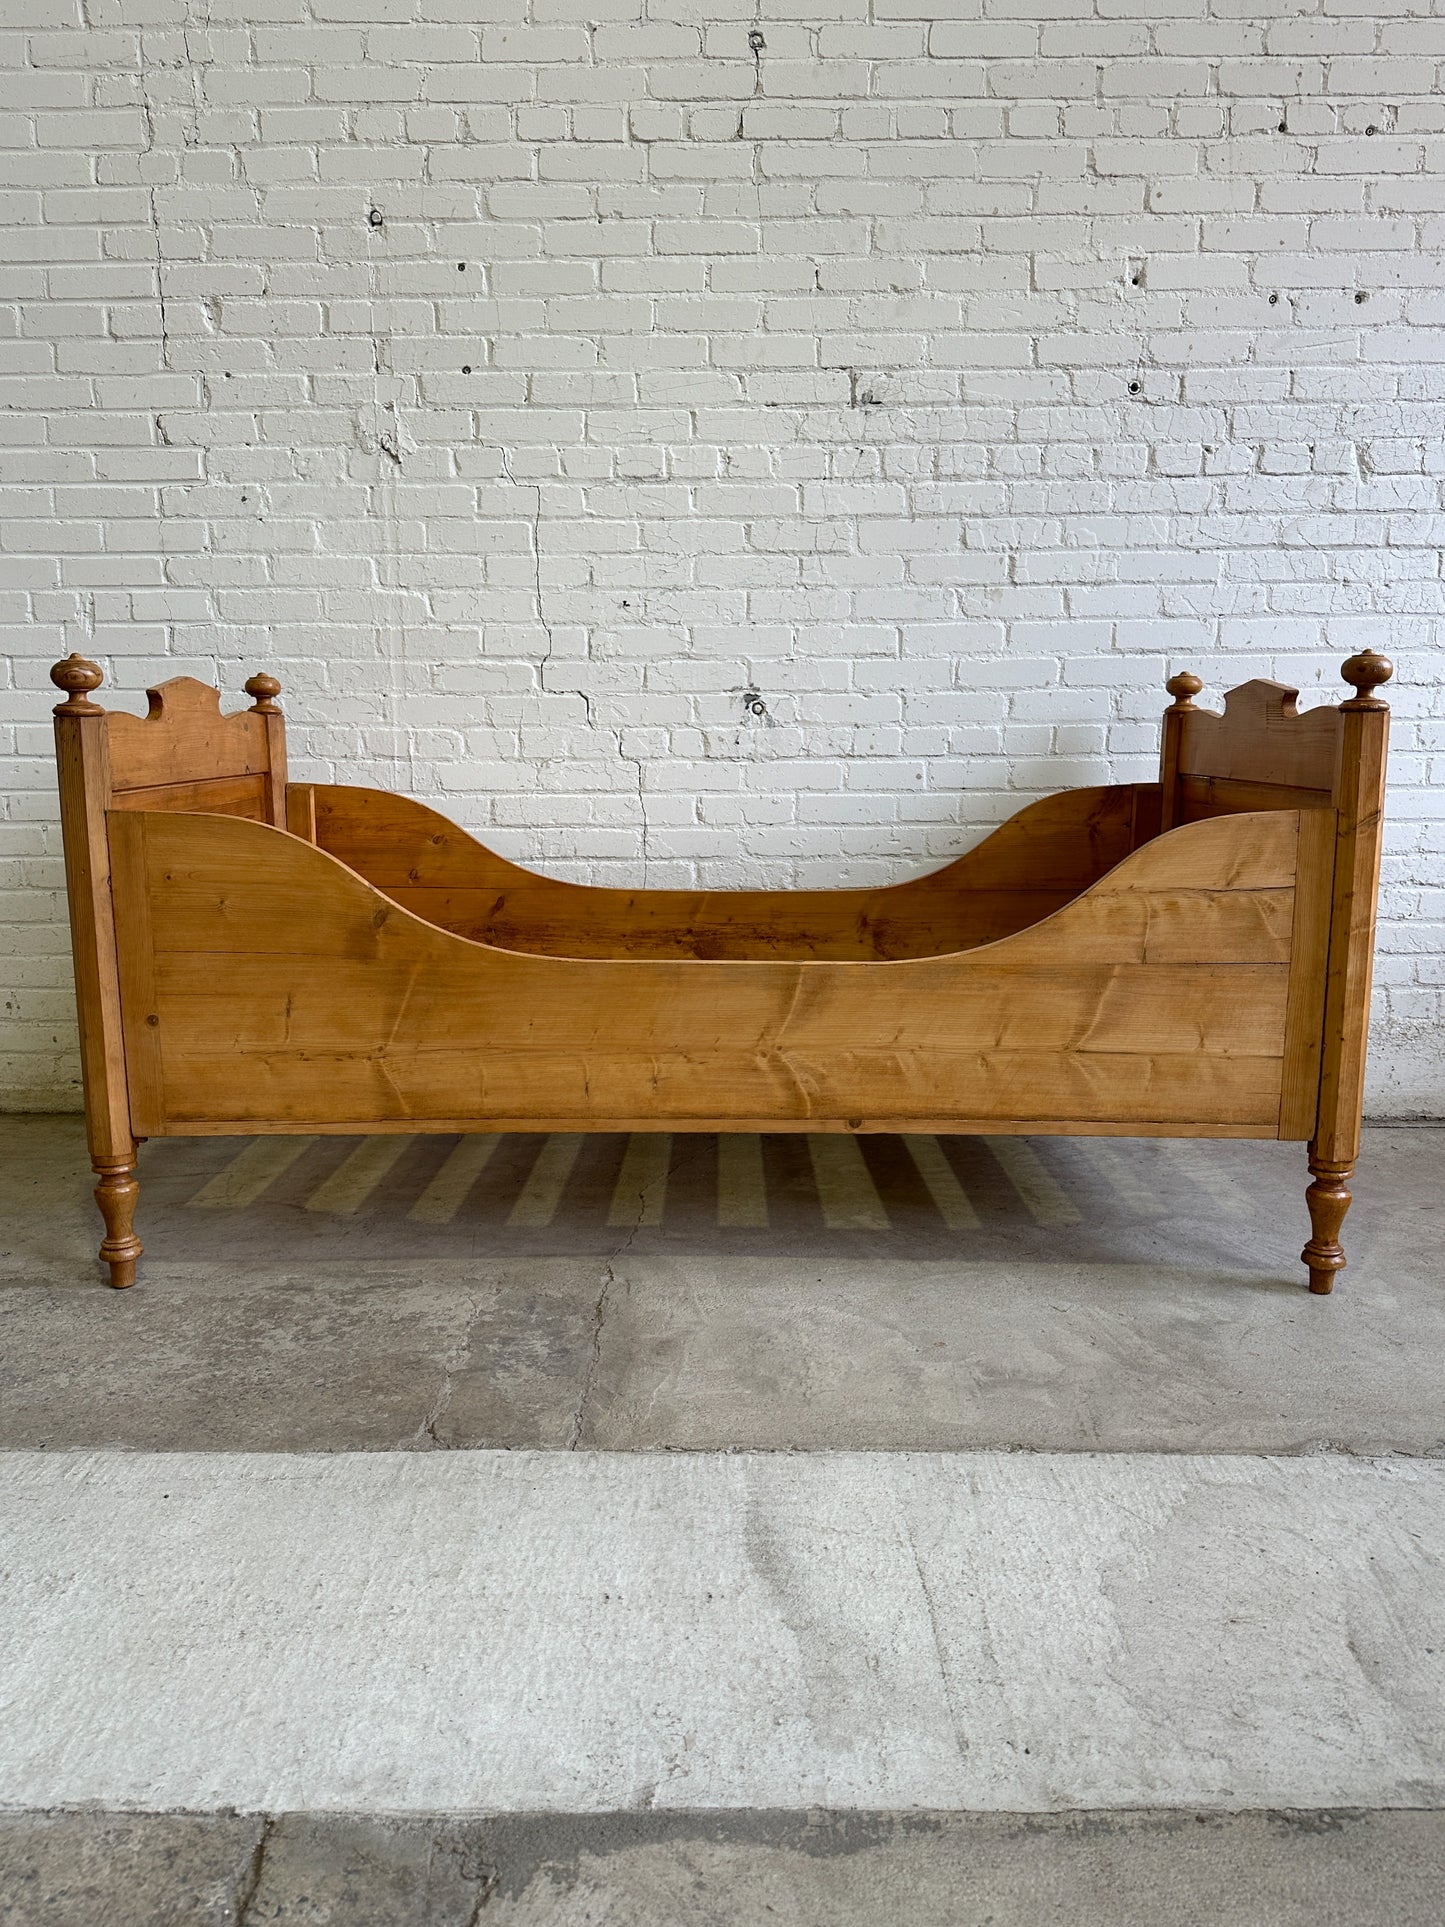 A Pair of Antique Pine Sleigh Beds, c. 1900